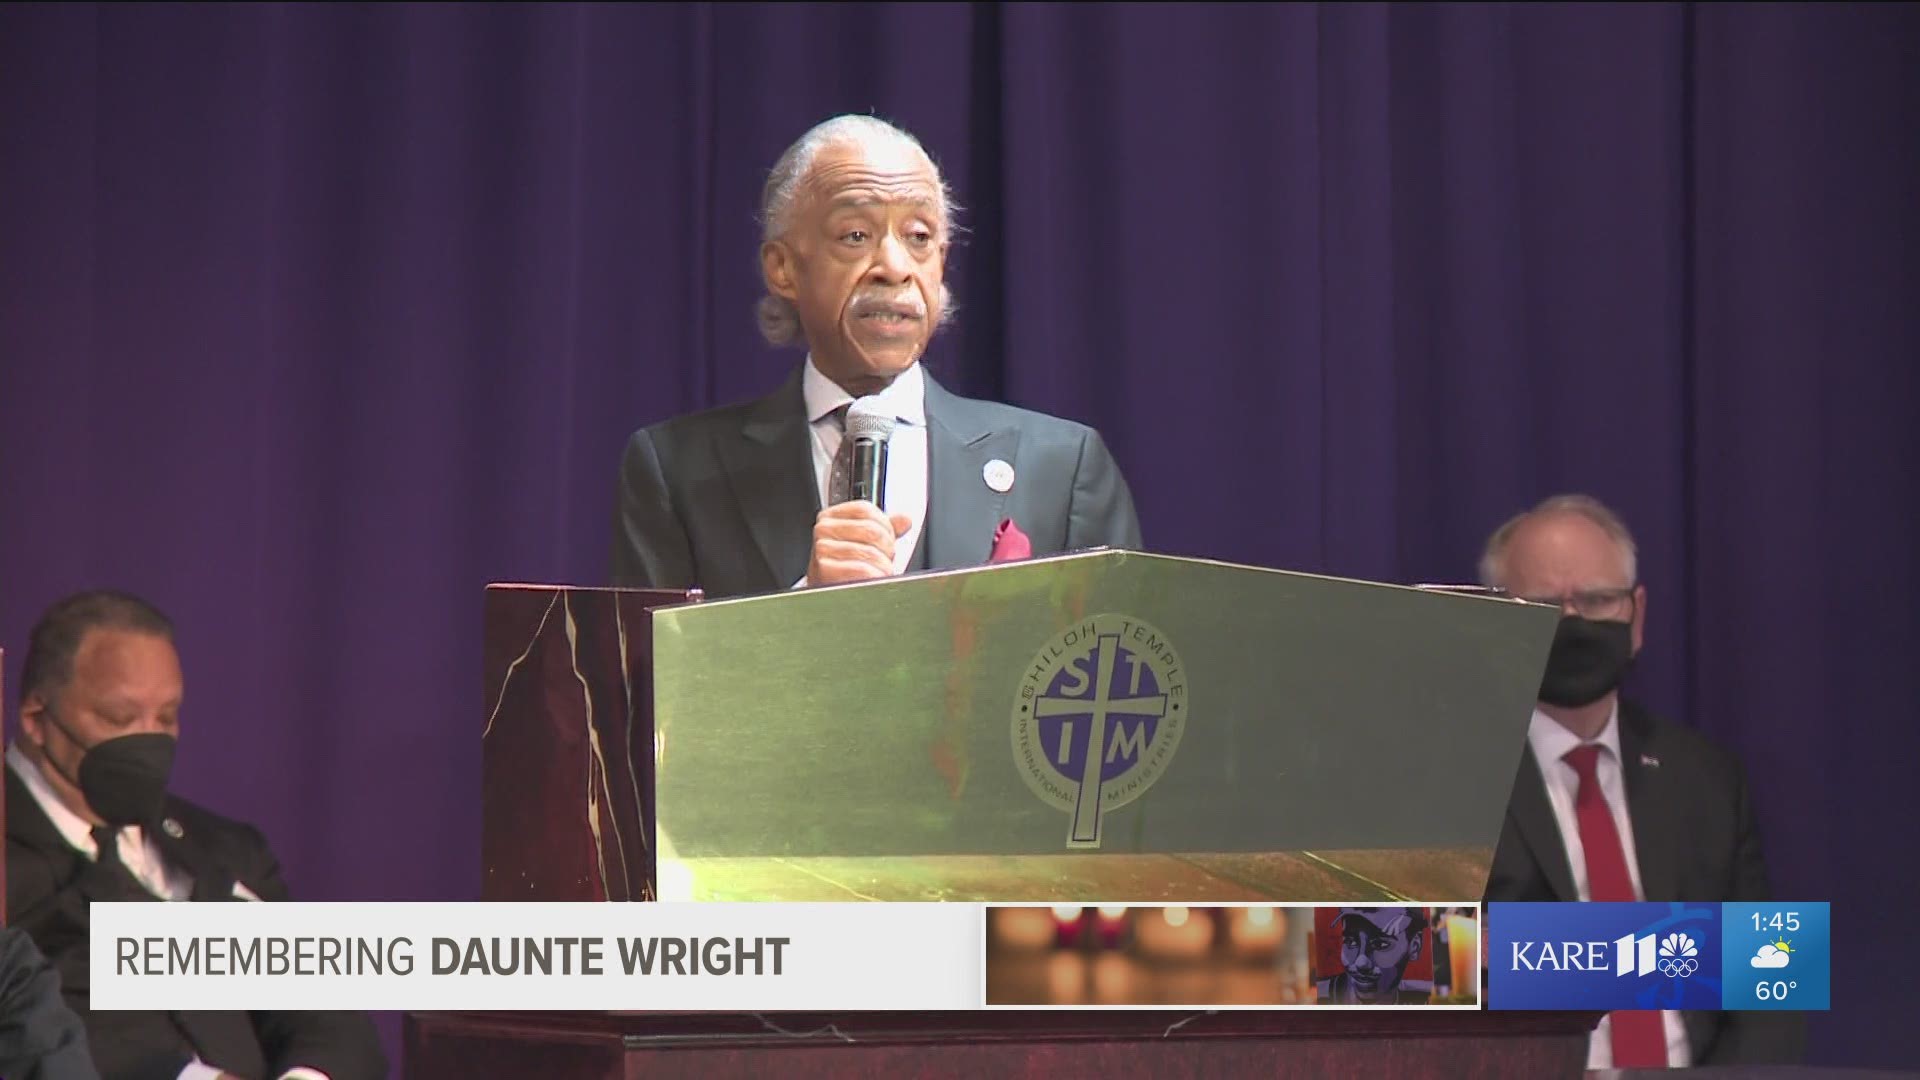 The Rev. Al Sharpton gave a fiery eulogy at the memorial service of Daunte Wright, marveling at the impact the young man's death has made on the community.